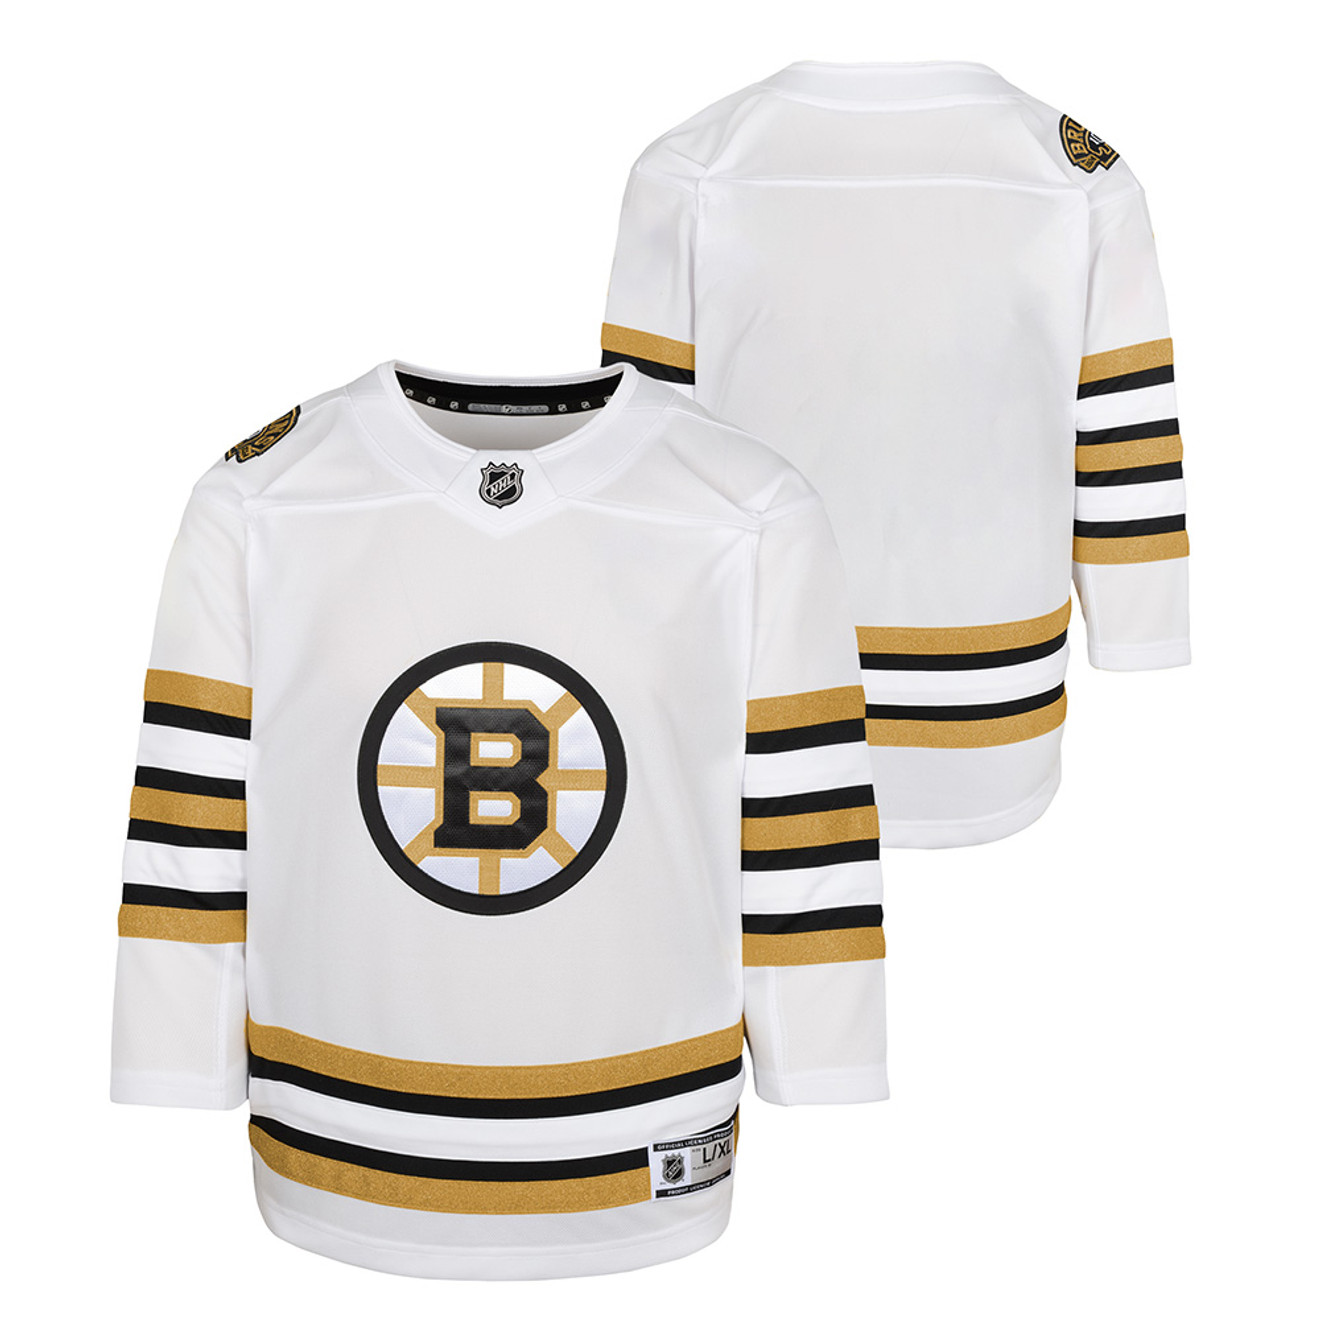 bruins jerseys over the years